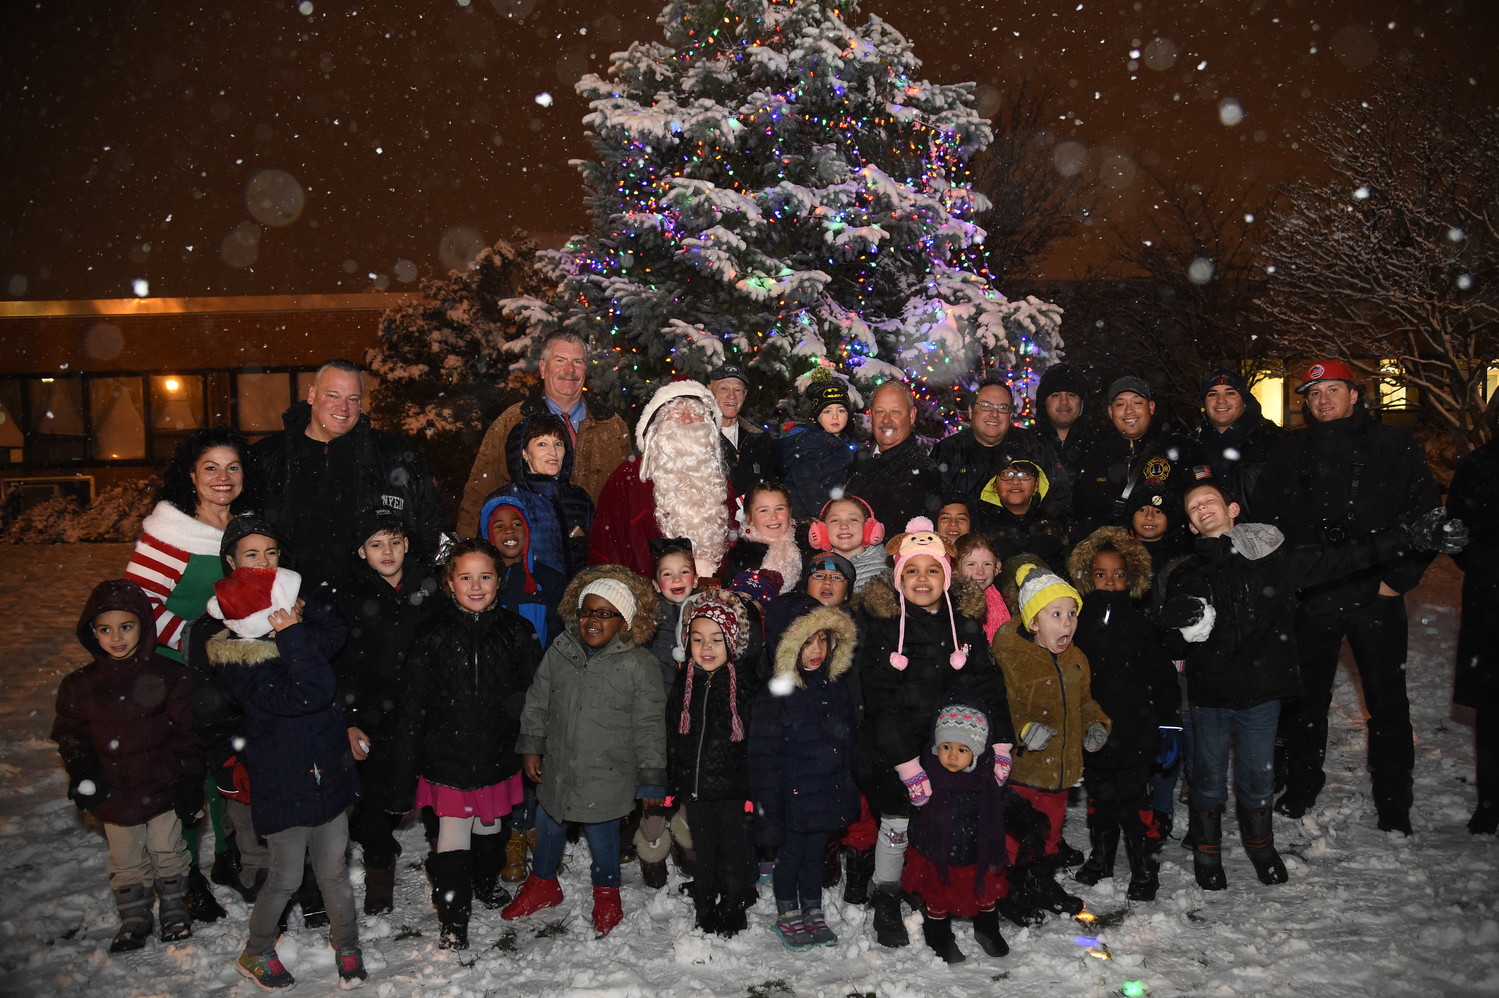 Freeporters along with huddled around Santa Clause after the lighting of the village’s Christmas tree.